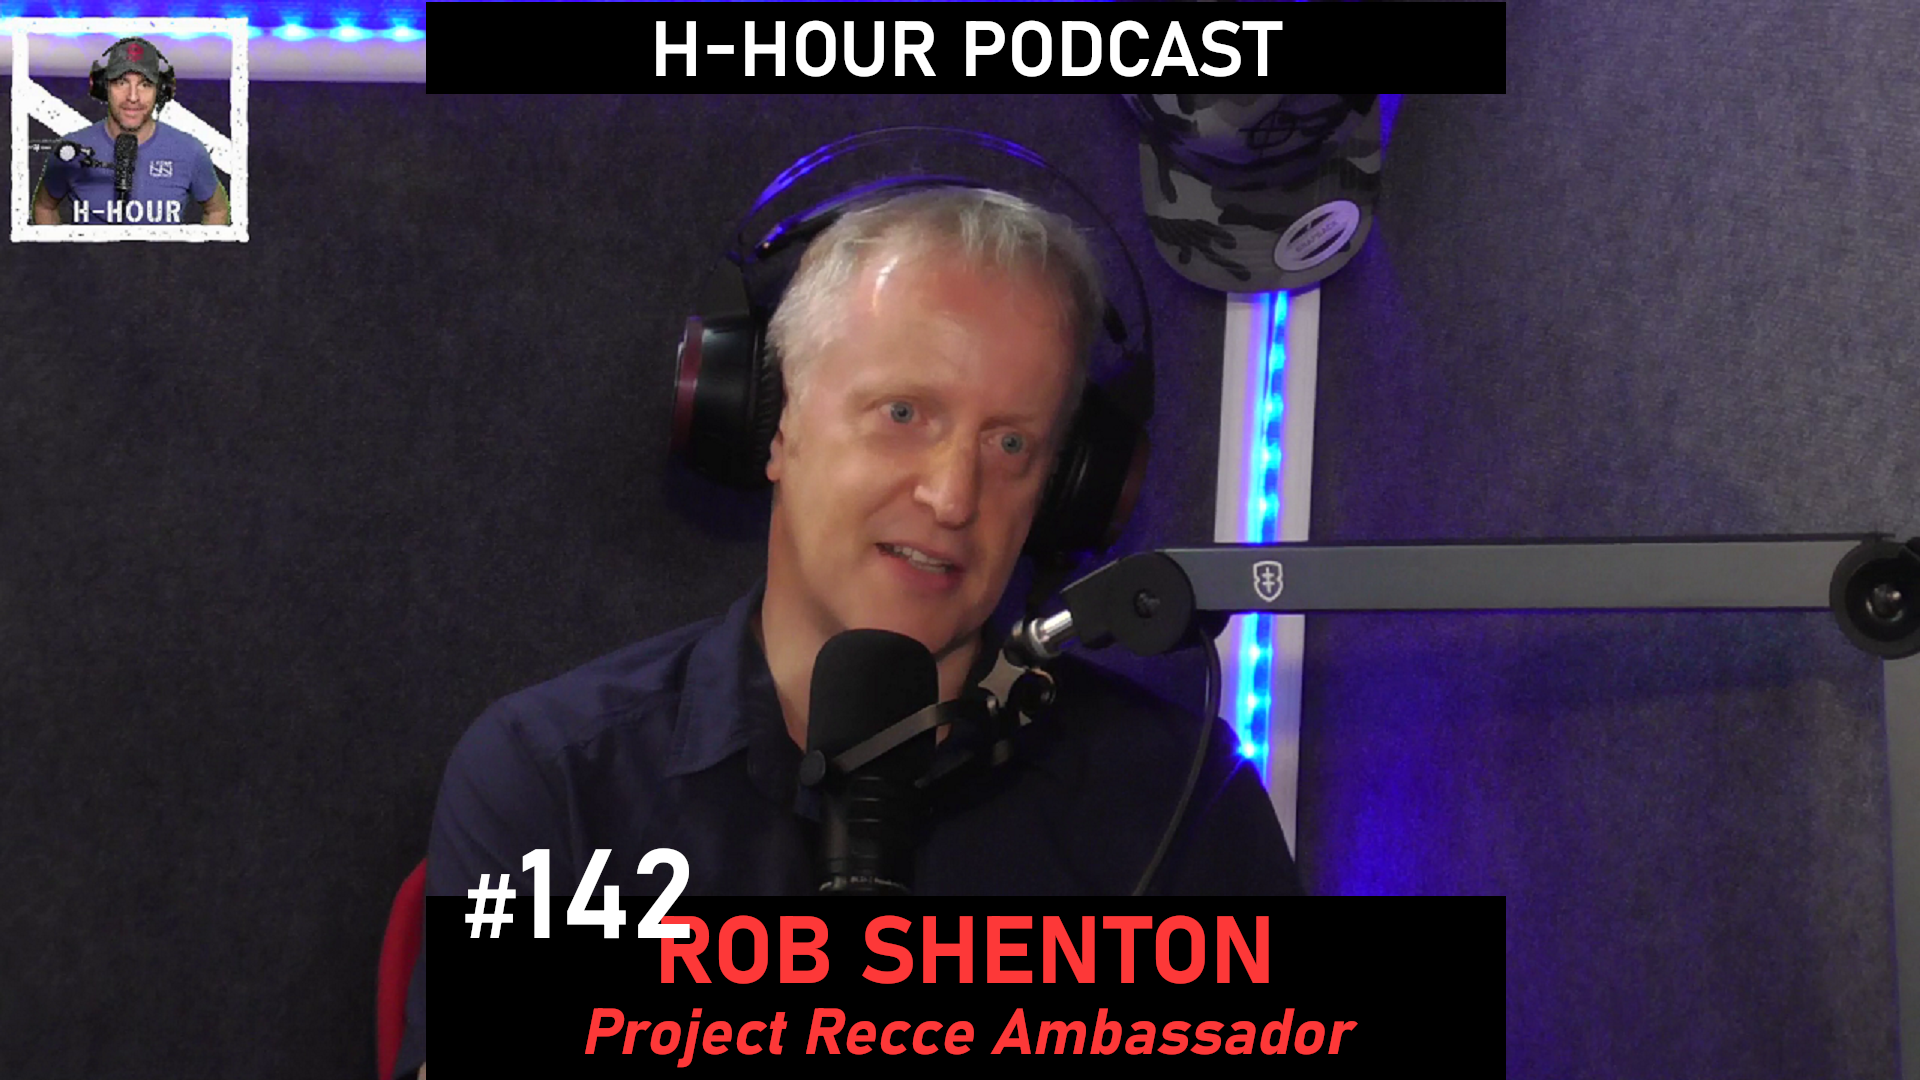 rob shenton charity runner on the h-hour podcast with hugh keir